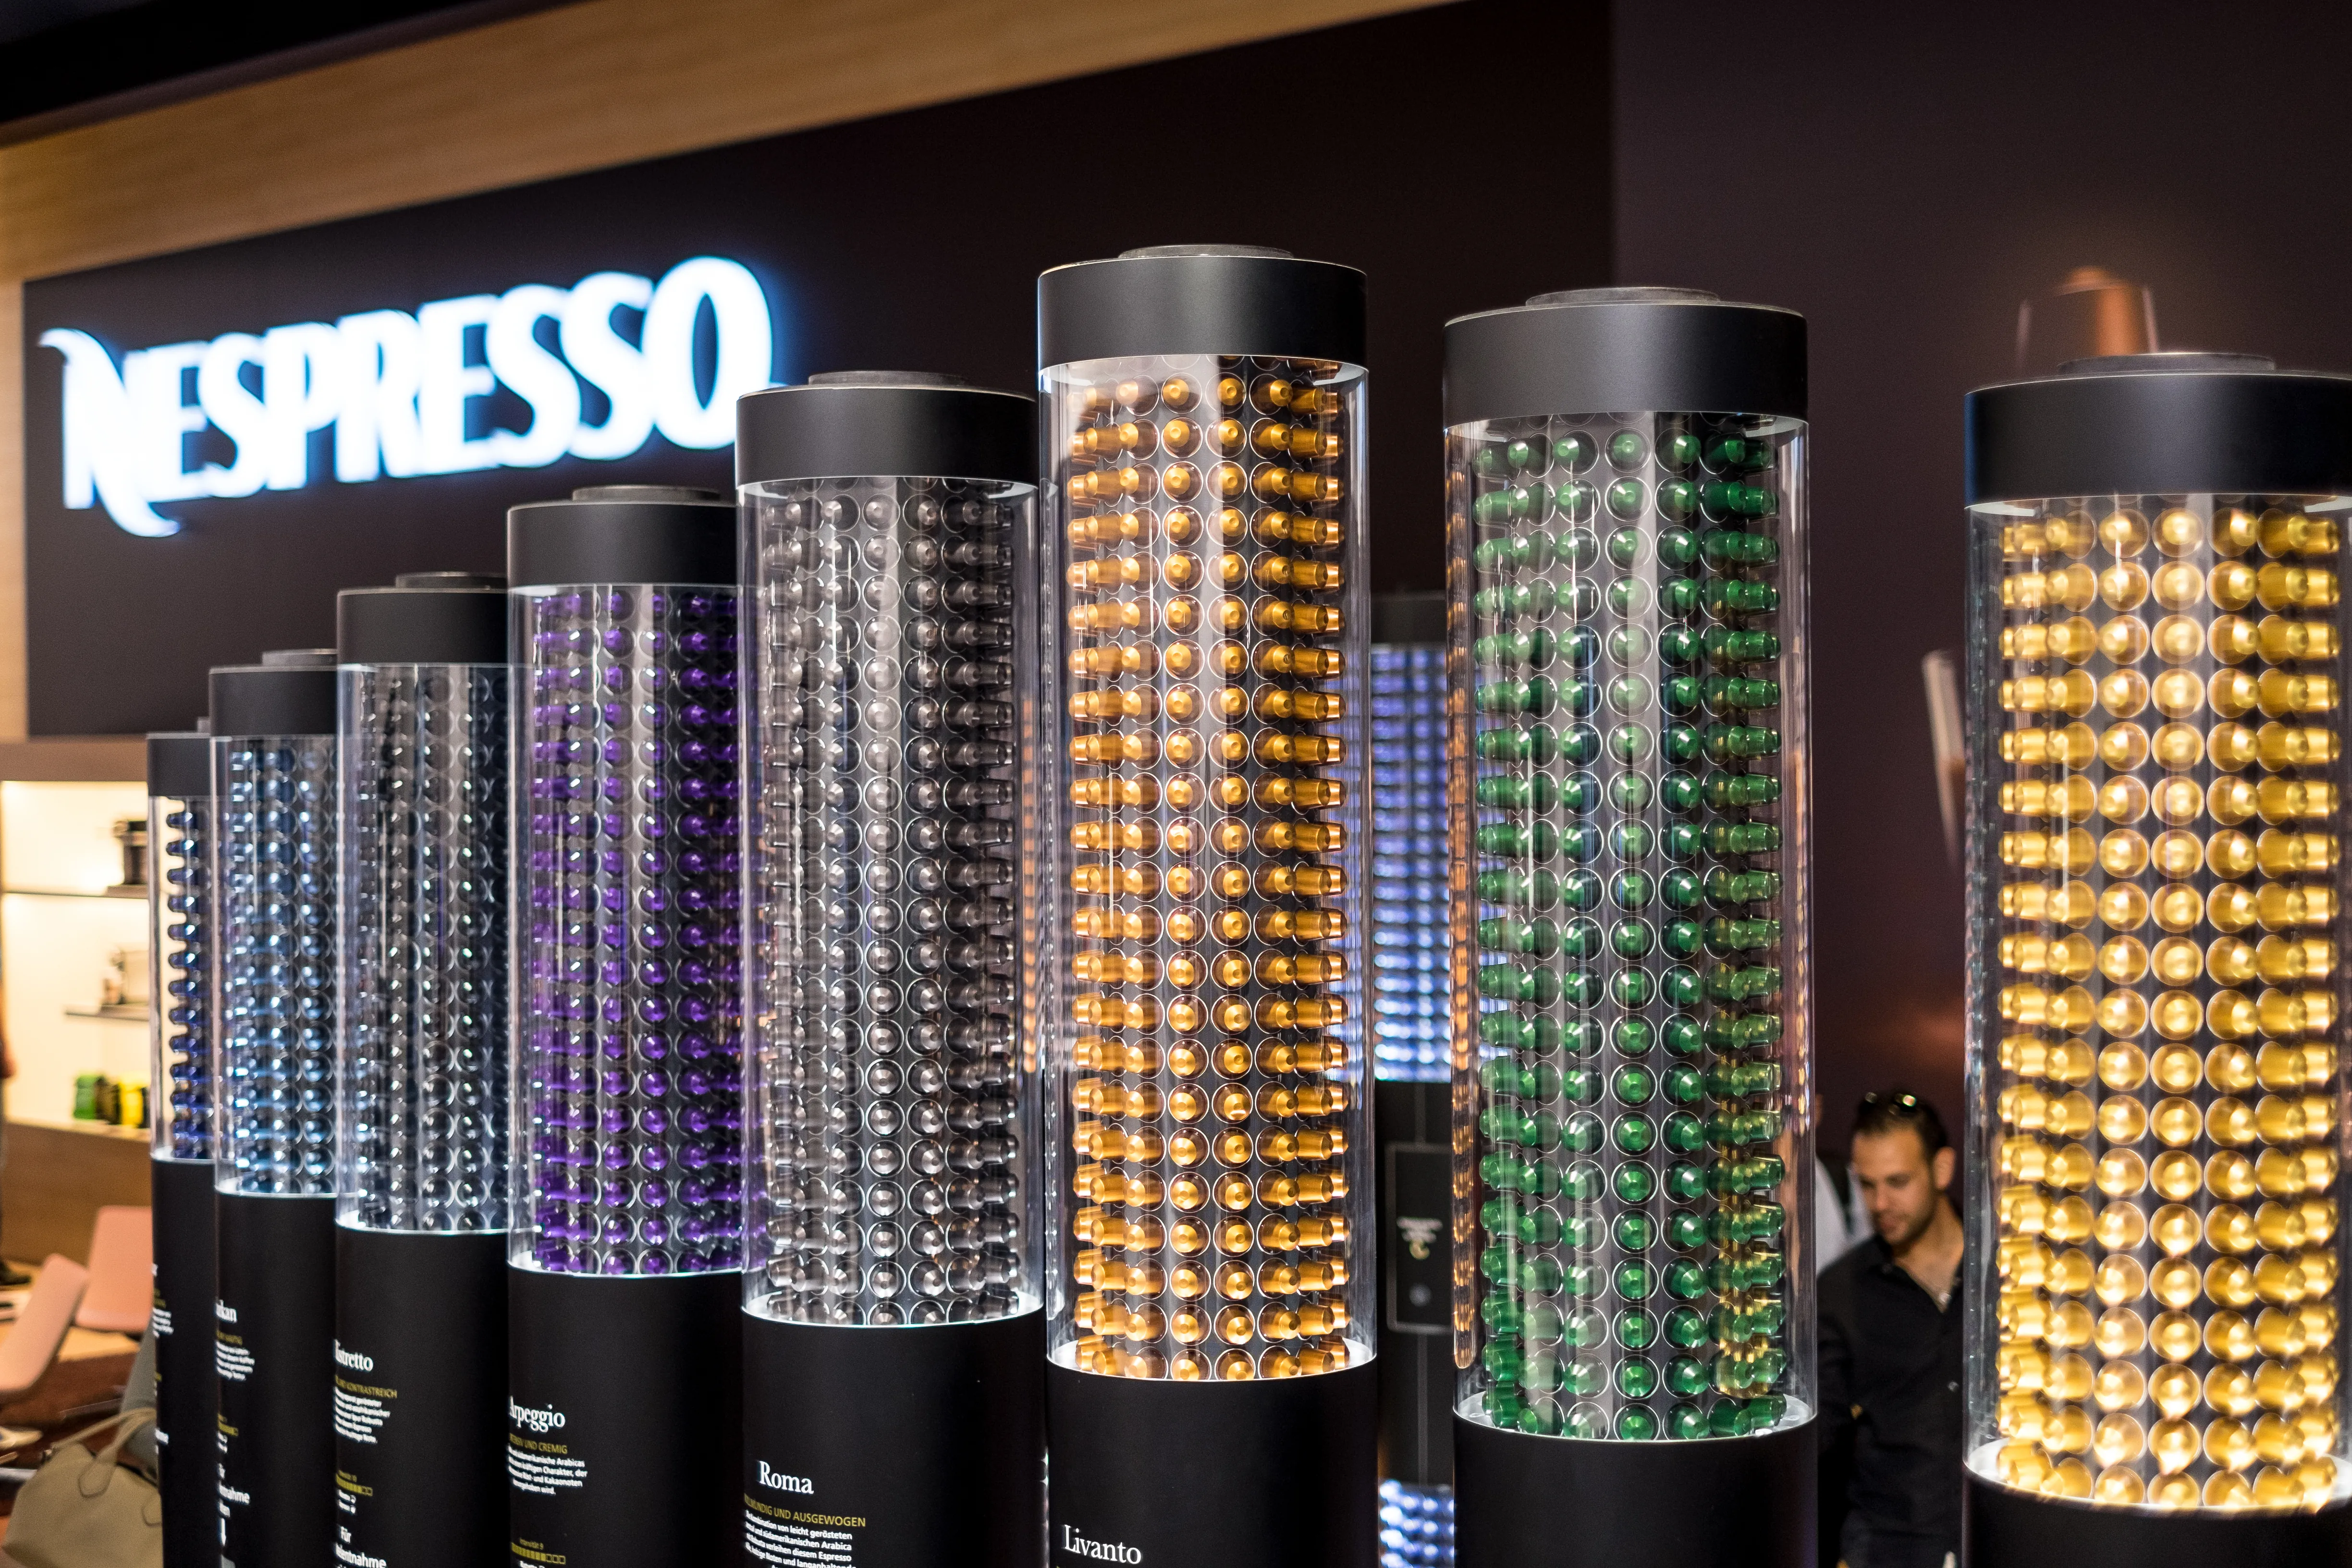 A photograph shows a display of all the small, plastic coffee pods made by Nespresso.